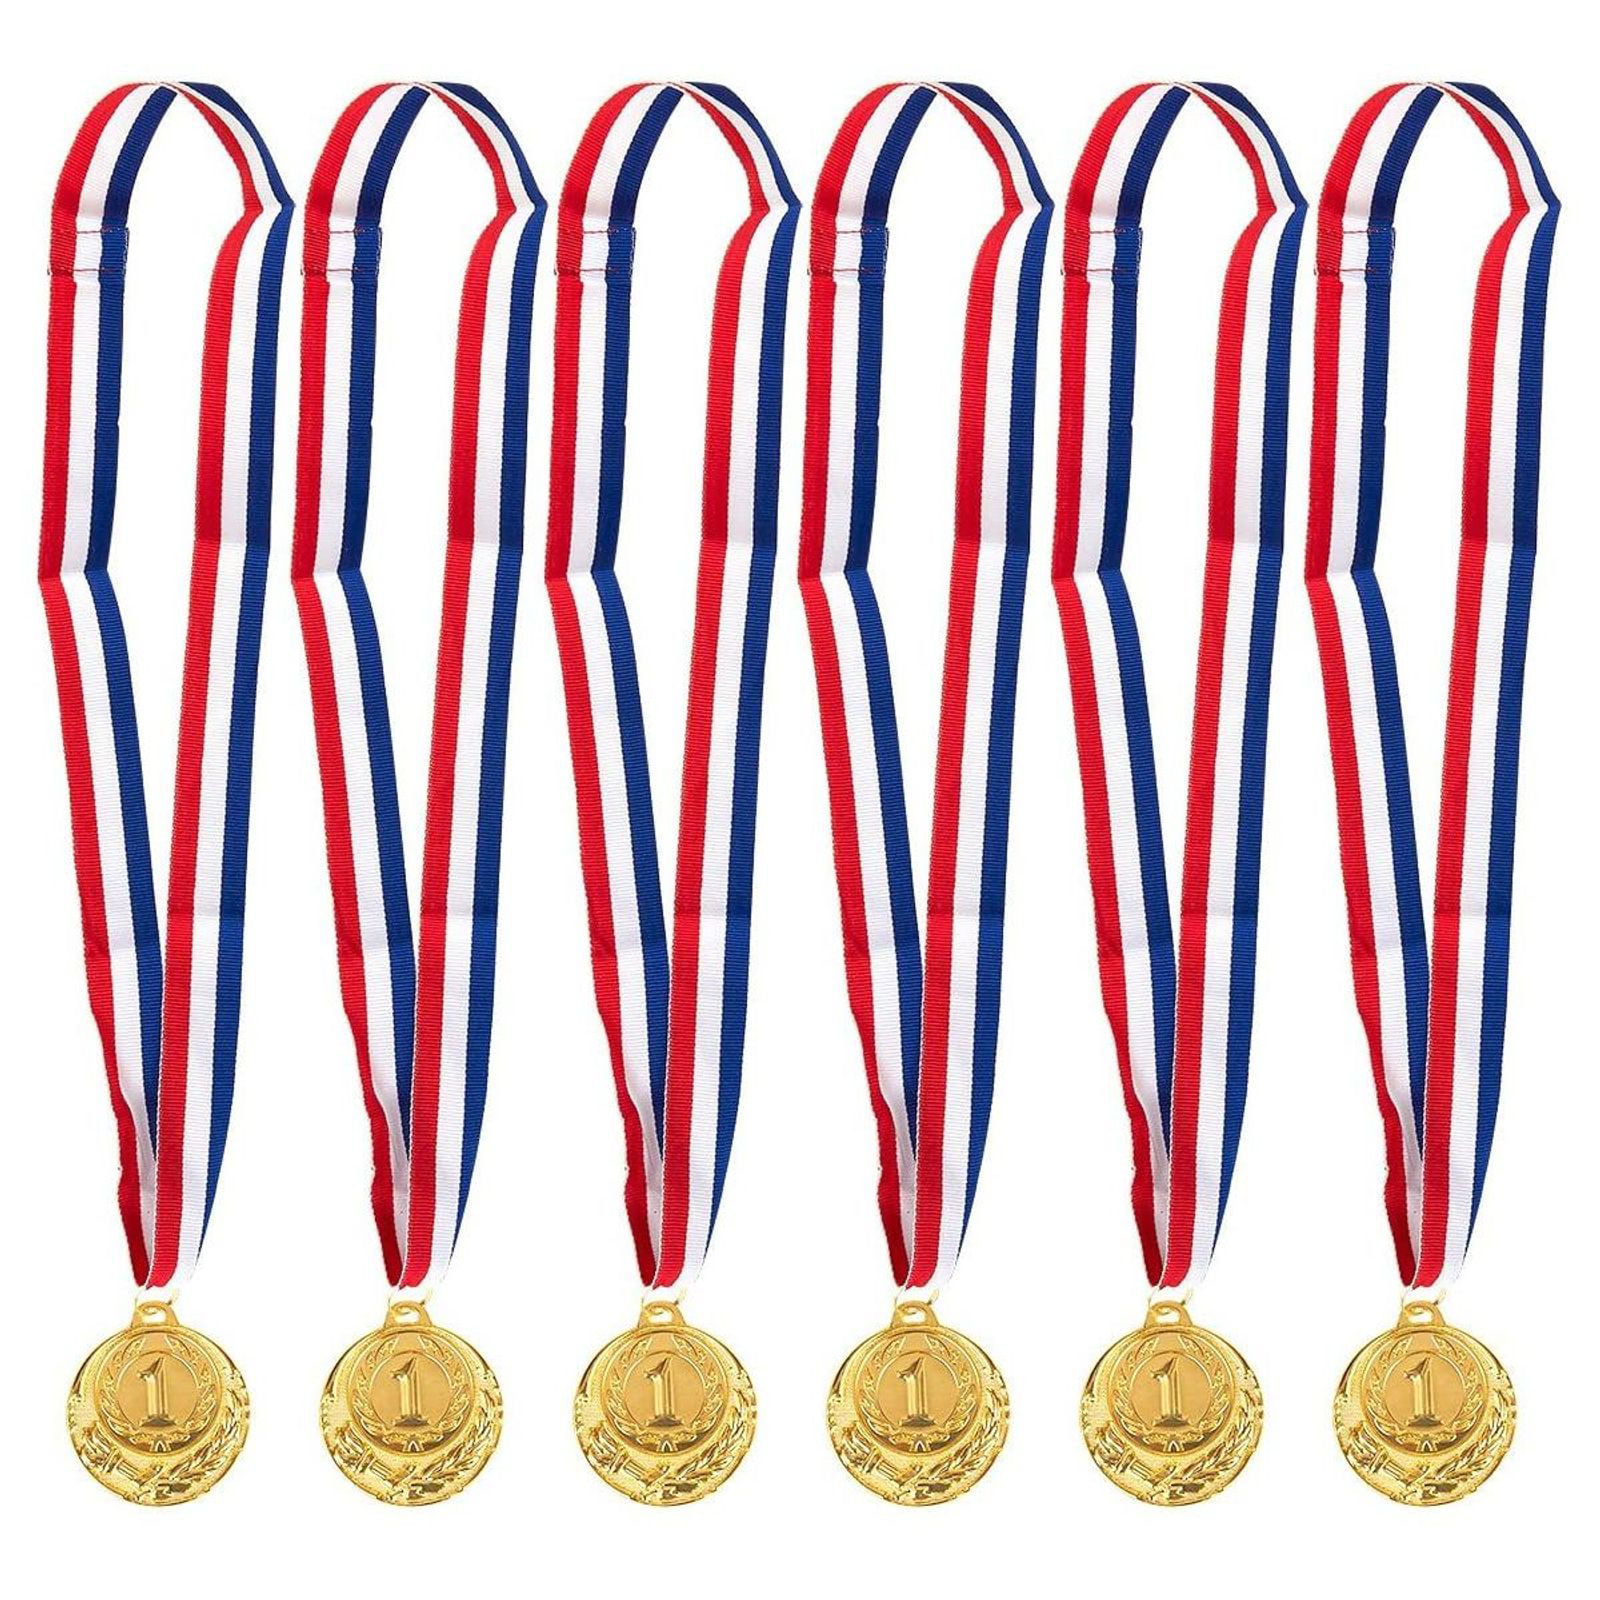 Party Favors Cimeton 10Pcs Golden Silver Bronze Award Medals Olympic Style for Competitions Spelling Bees Sports 